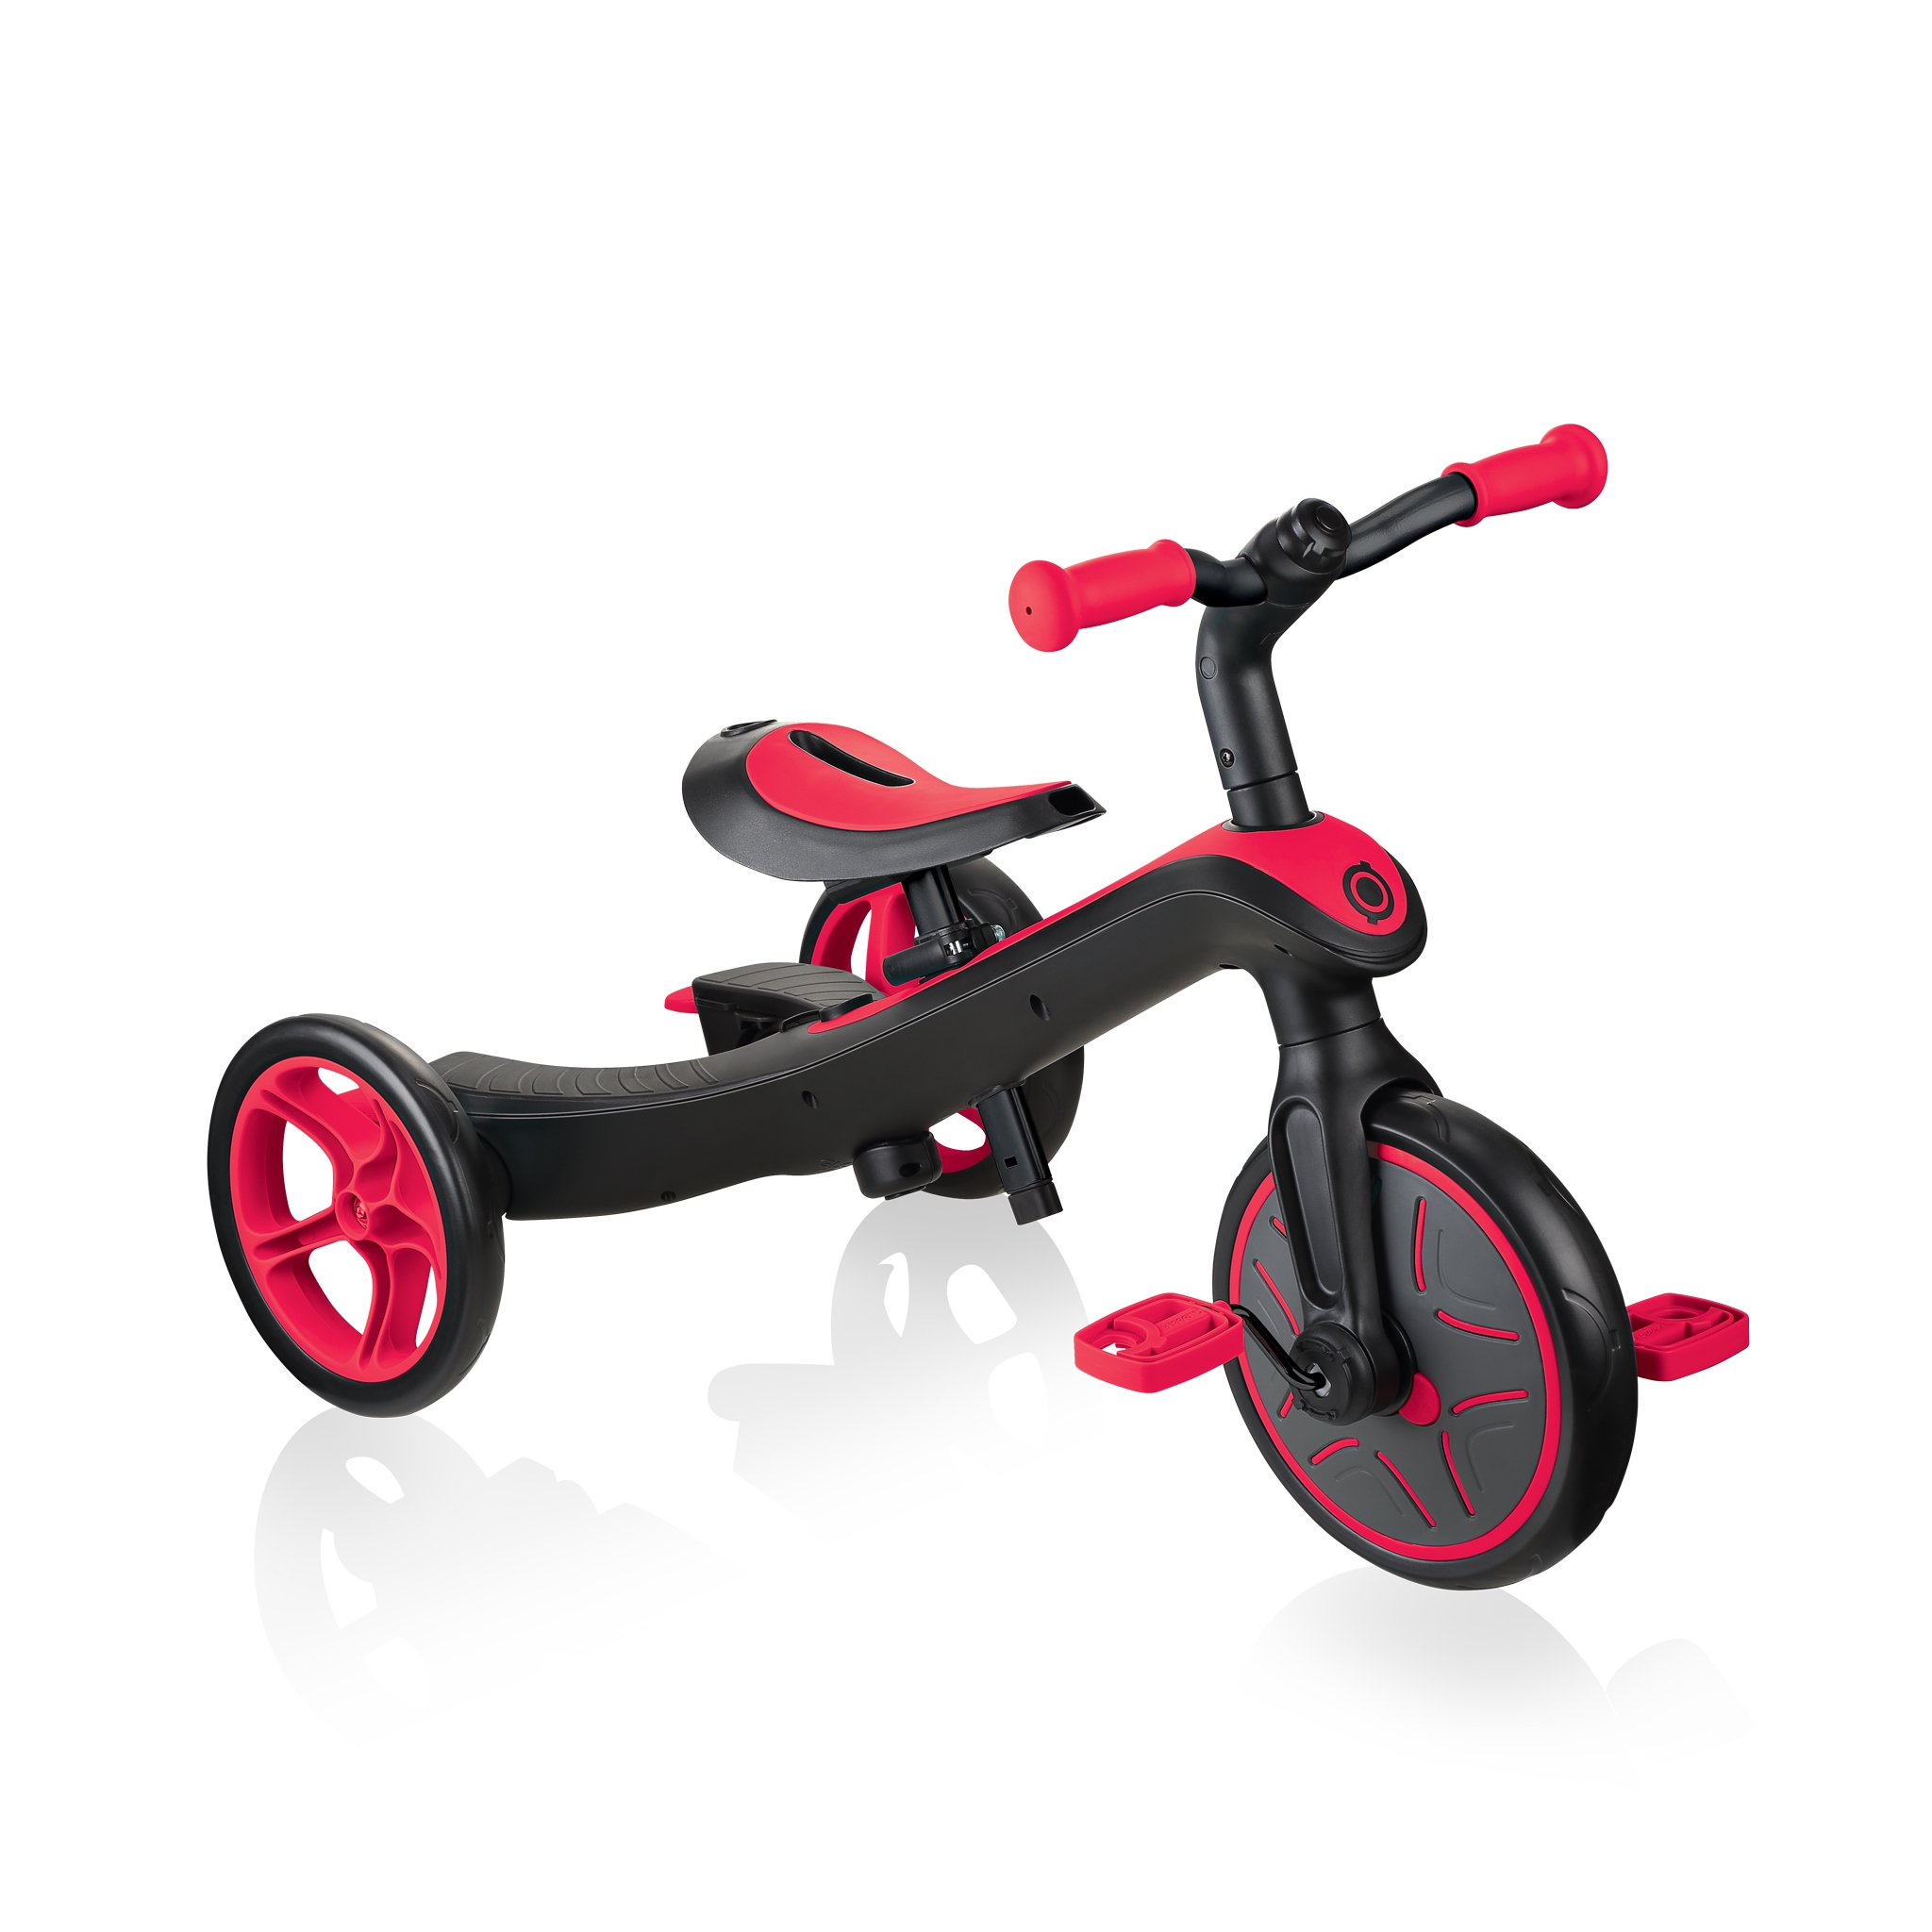 Globber-EXPLORER-TRIKE-3in1-all-in-one-baby-tricycle-and-kids-balance-bike-stage-2-training-trike_new-red 1